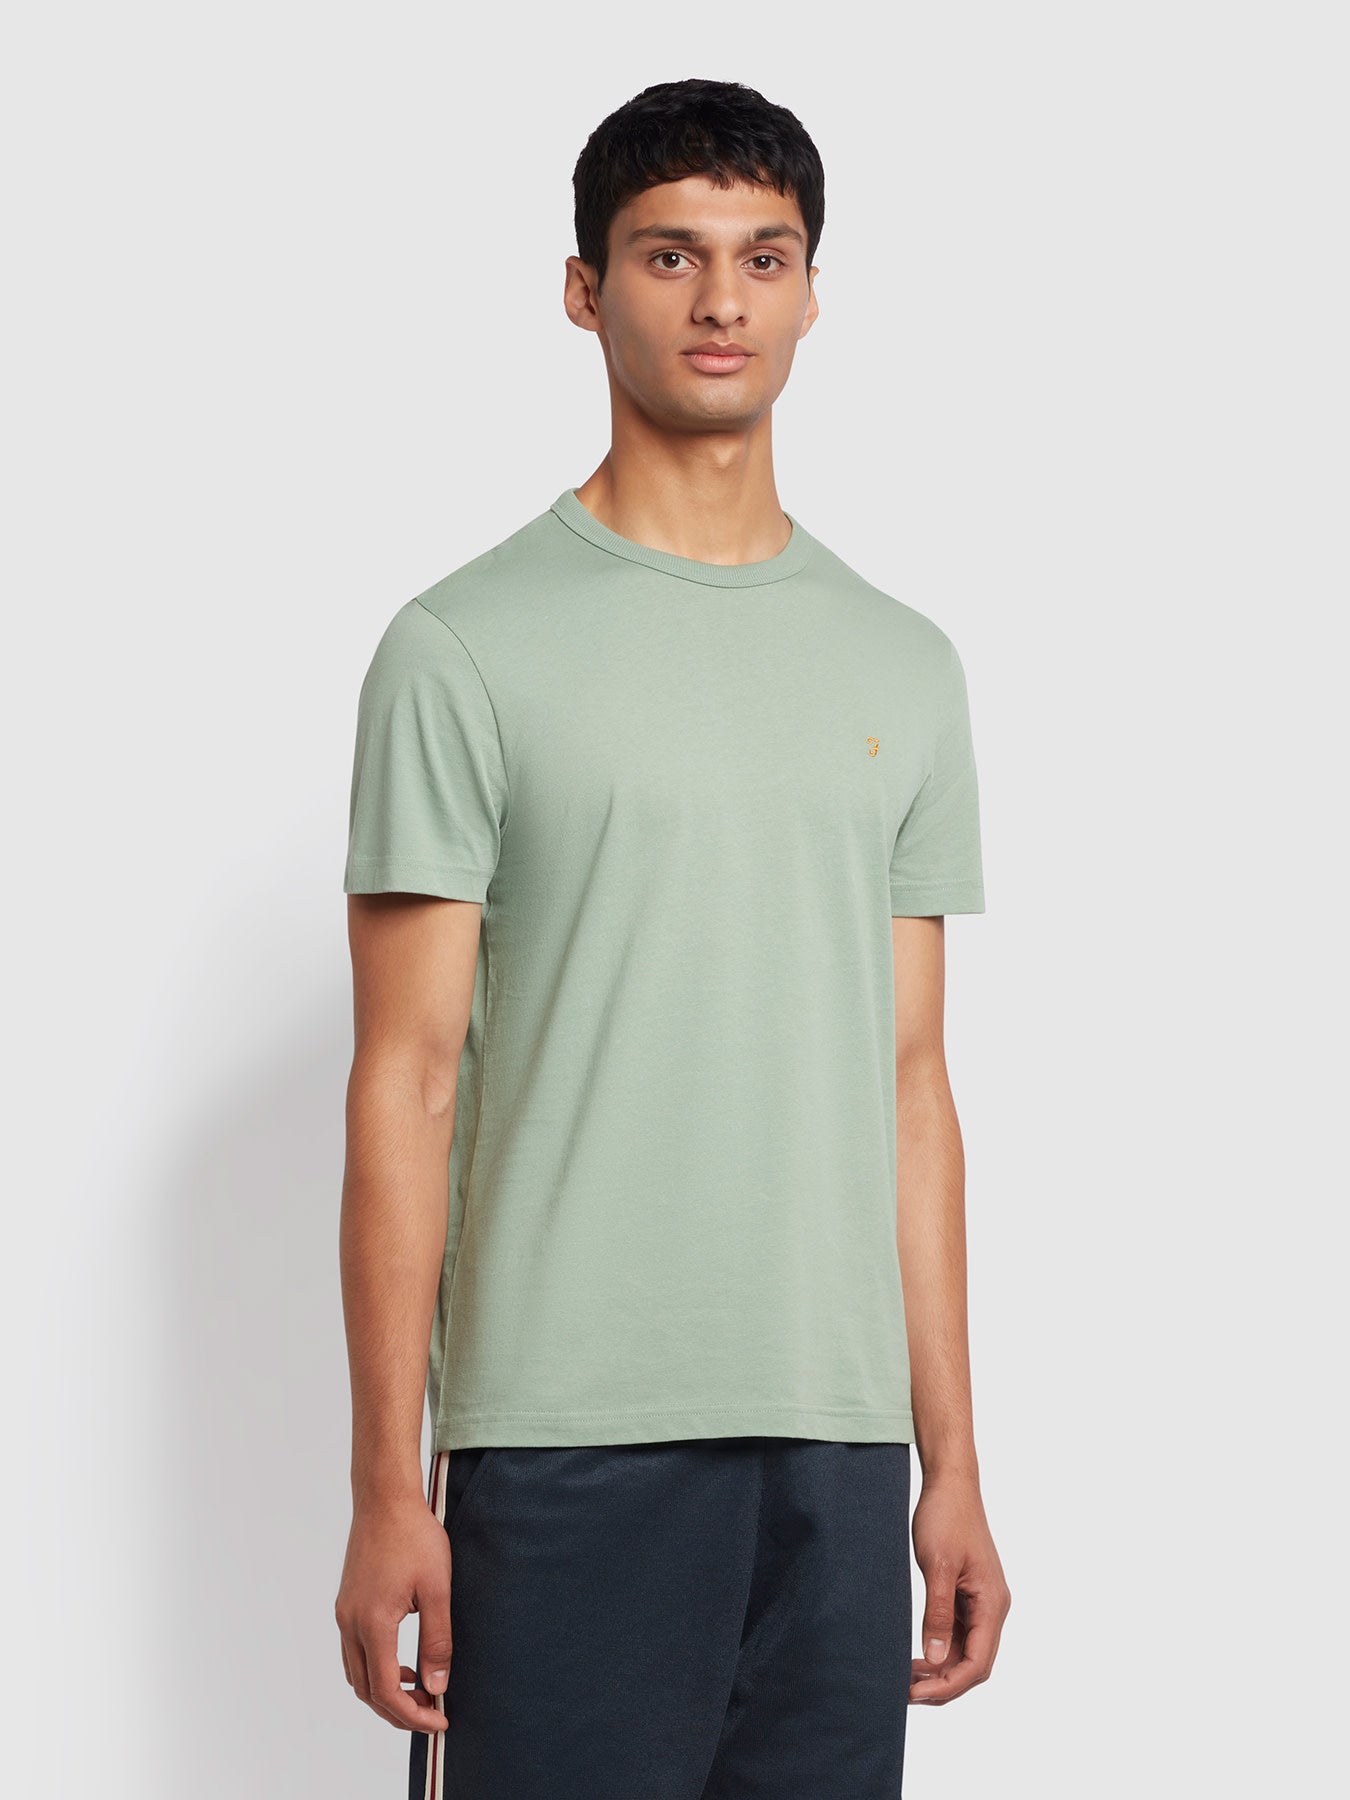 View Danny Regular Fit Organic Cotton TShirt In Archive Green Sage information